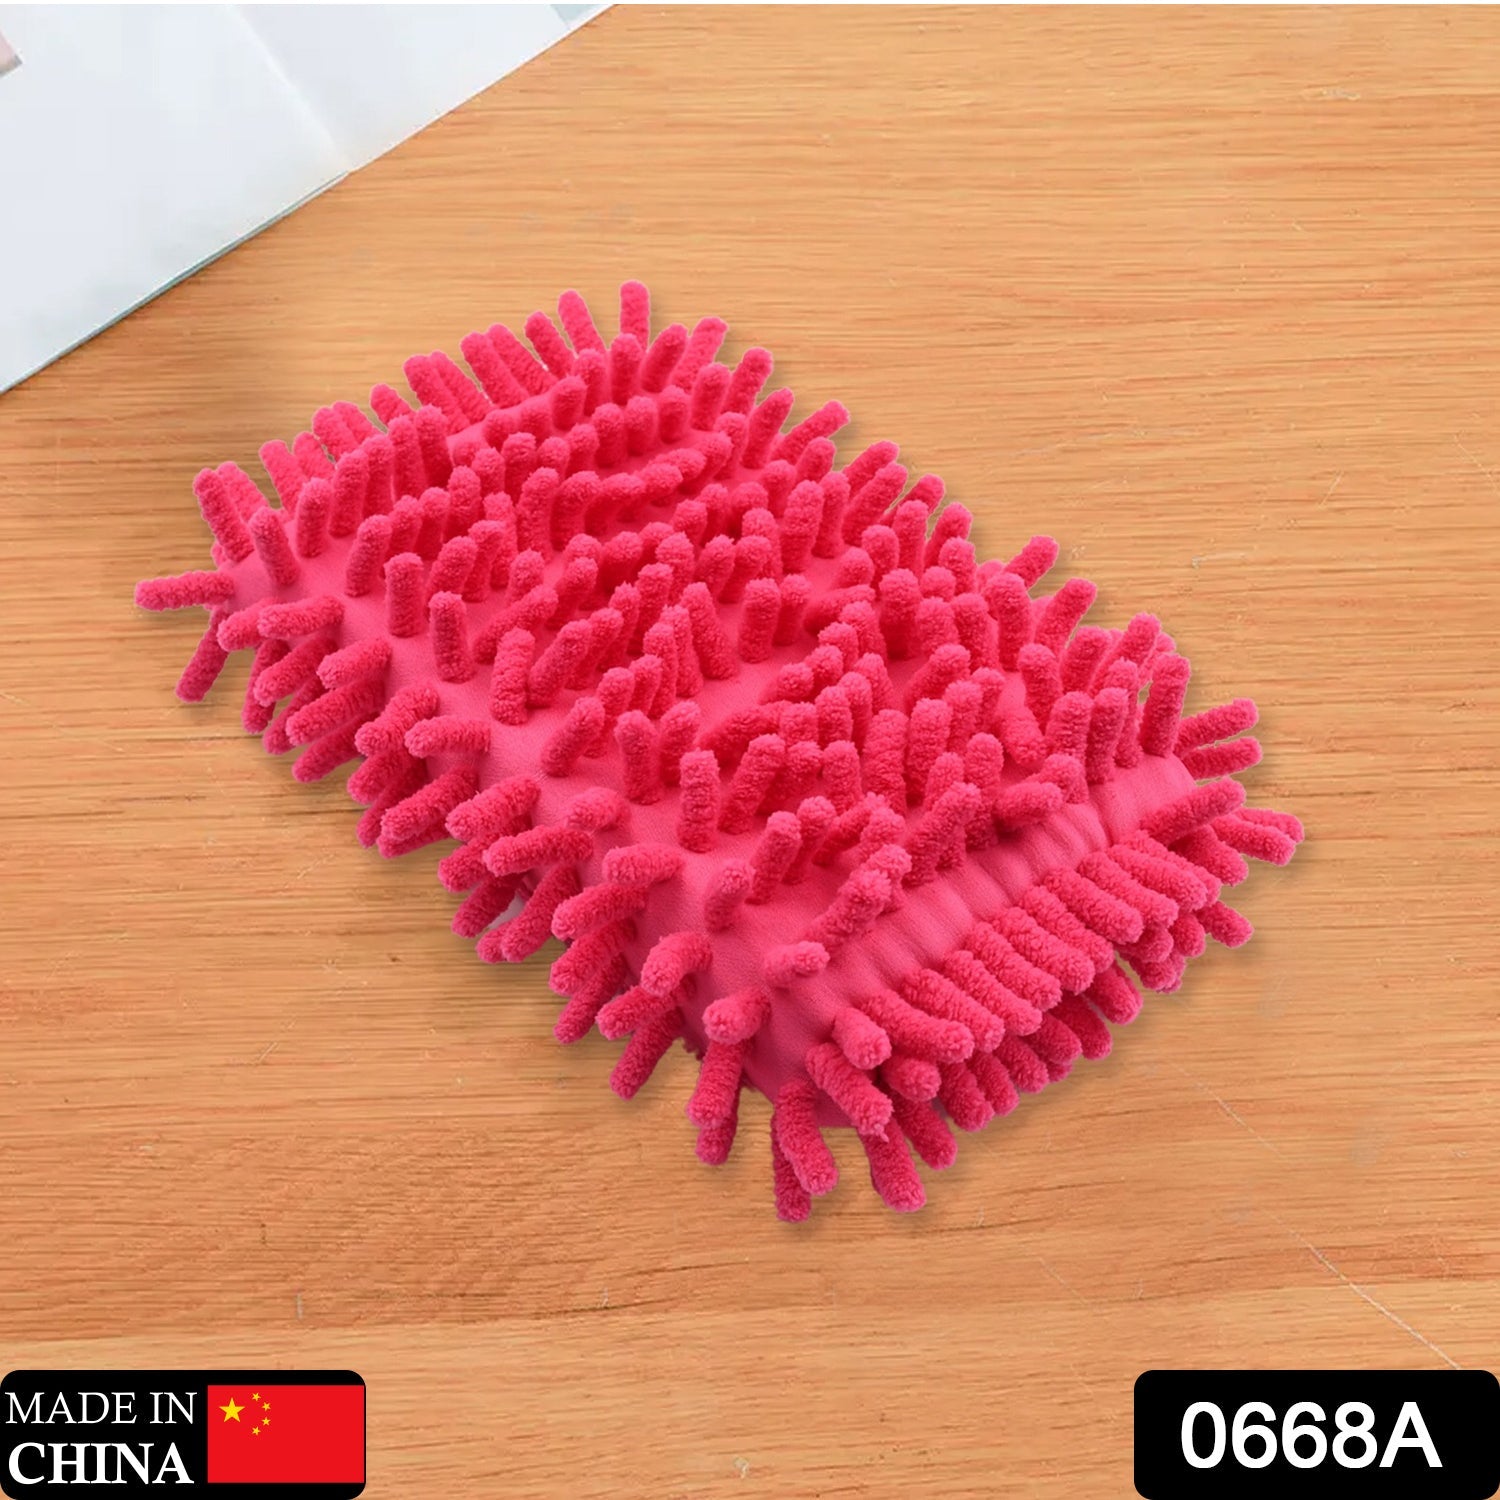 0668a Multipurpose Microfiber Duster Whiteboard Eraser  Washable Dry Eraser Board Eraser Cleaning Sponge for Chalk, Classroom Teacher Supplies, Home and Office, Car Washing Scratch-Free Microfiber Brushes